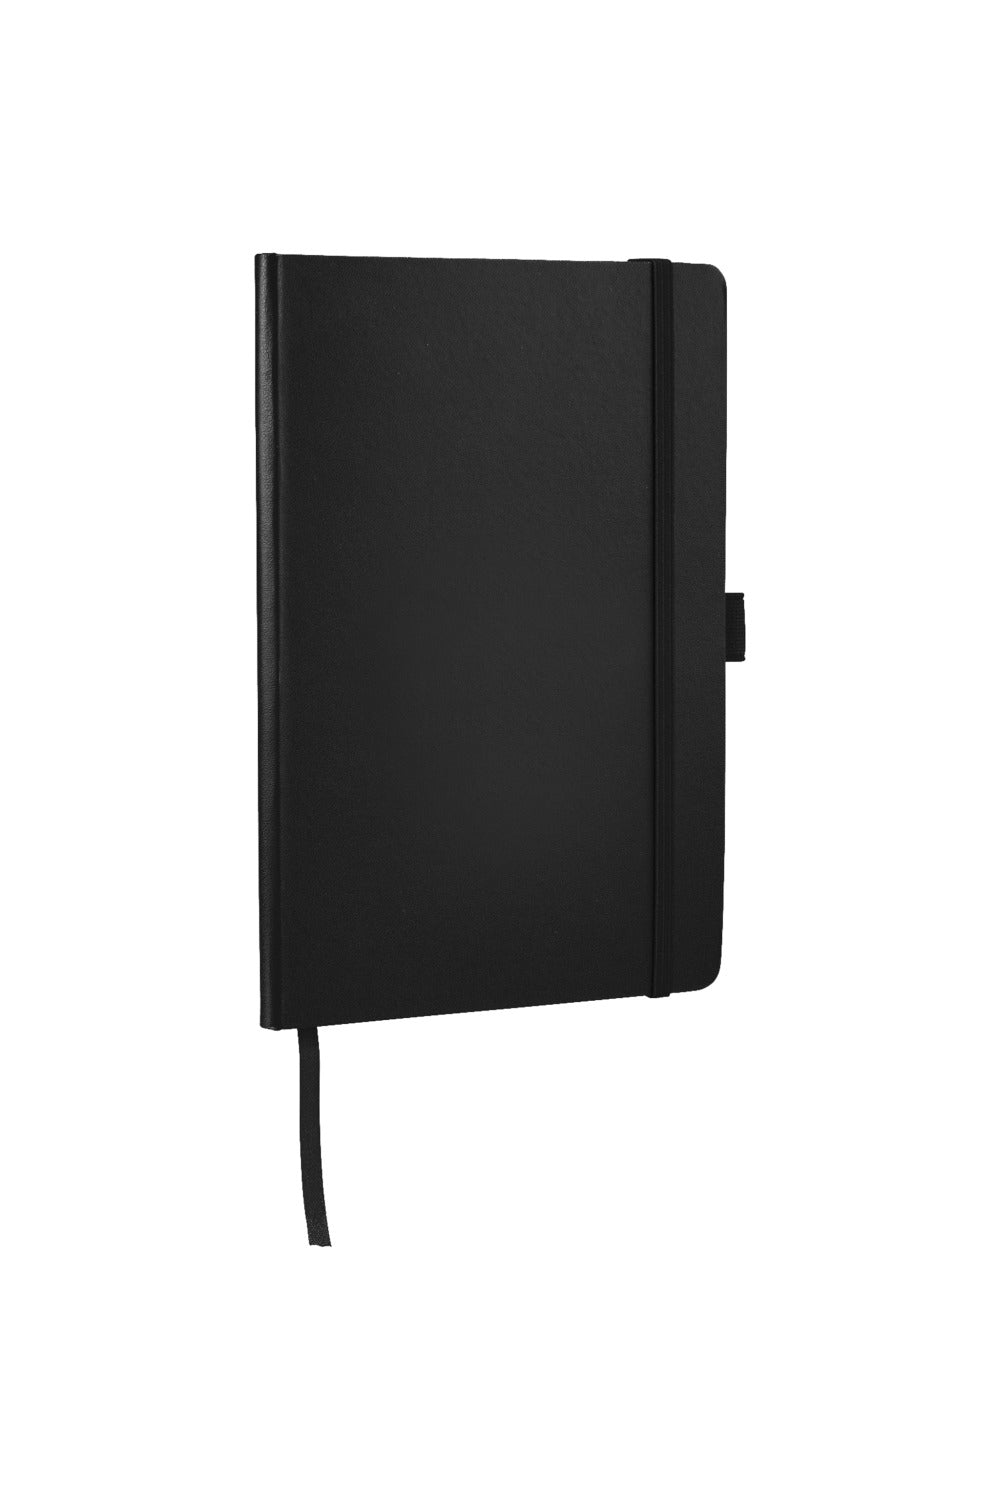 JournalBooks Flex Back Cover Office Notebook (Solid Black) (8.4 x 5.7 x 0.6 inches)